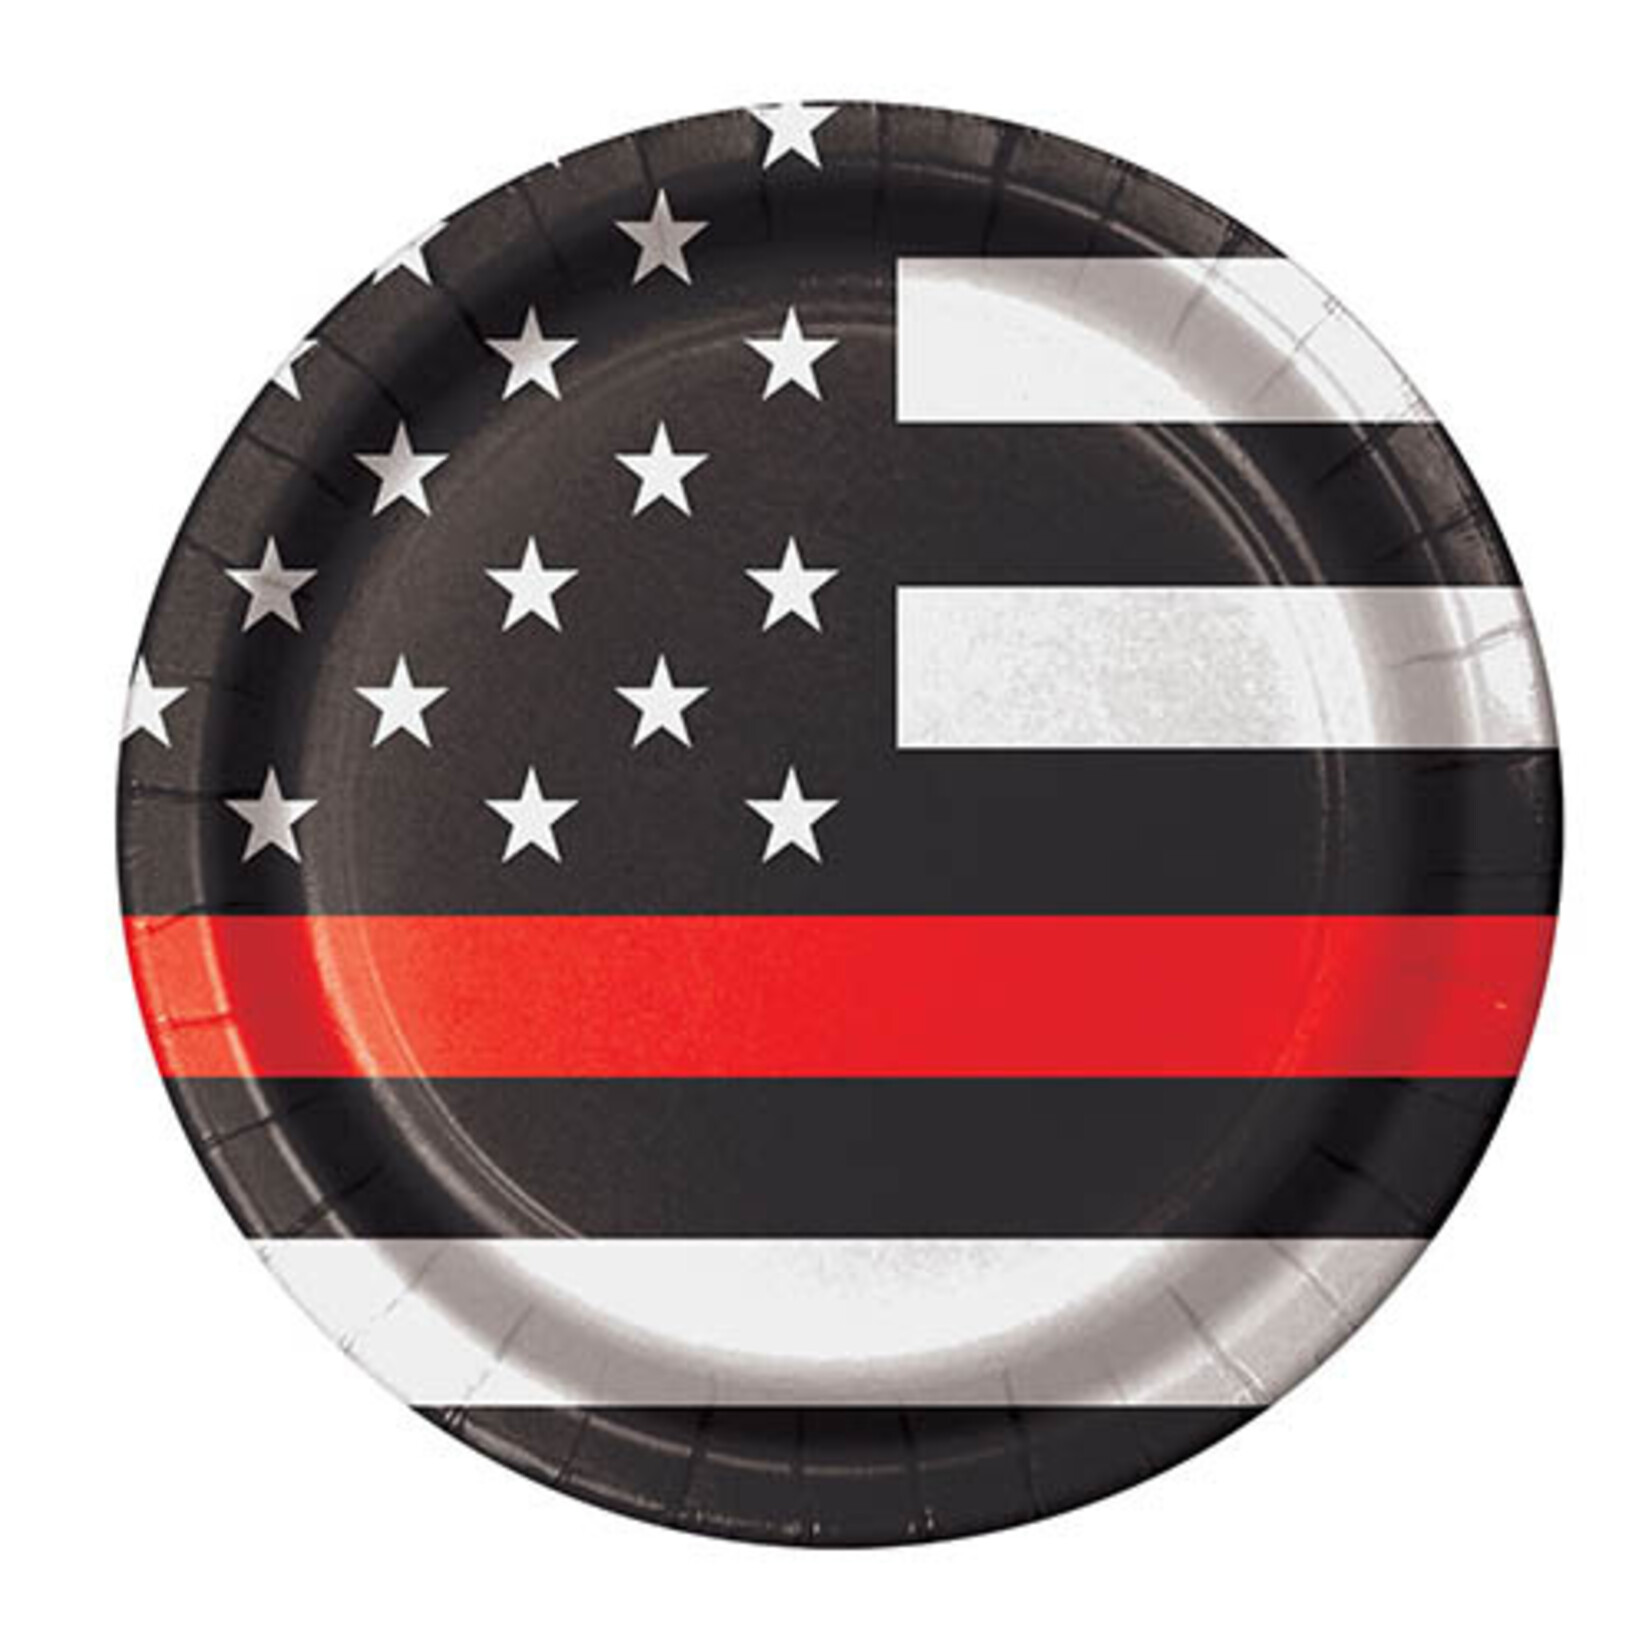 Havercamp 7" Fire & Emt Thin Red Line Plates - 8ct.